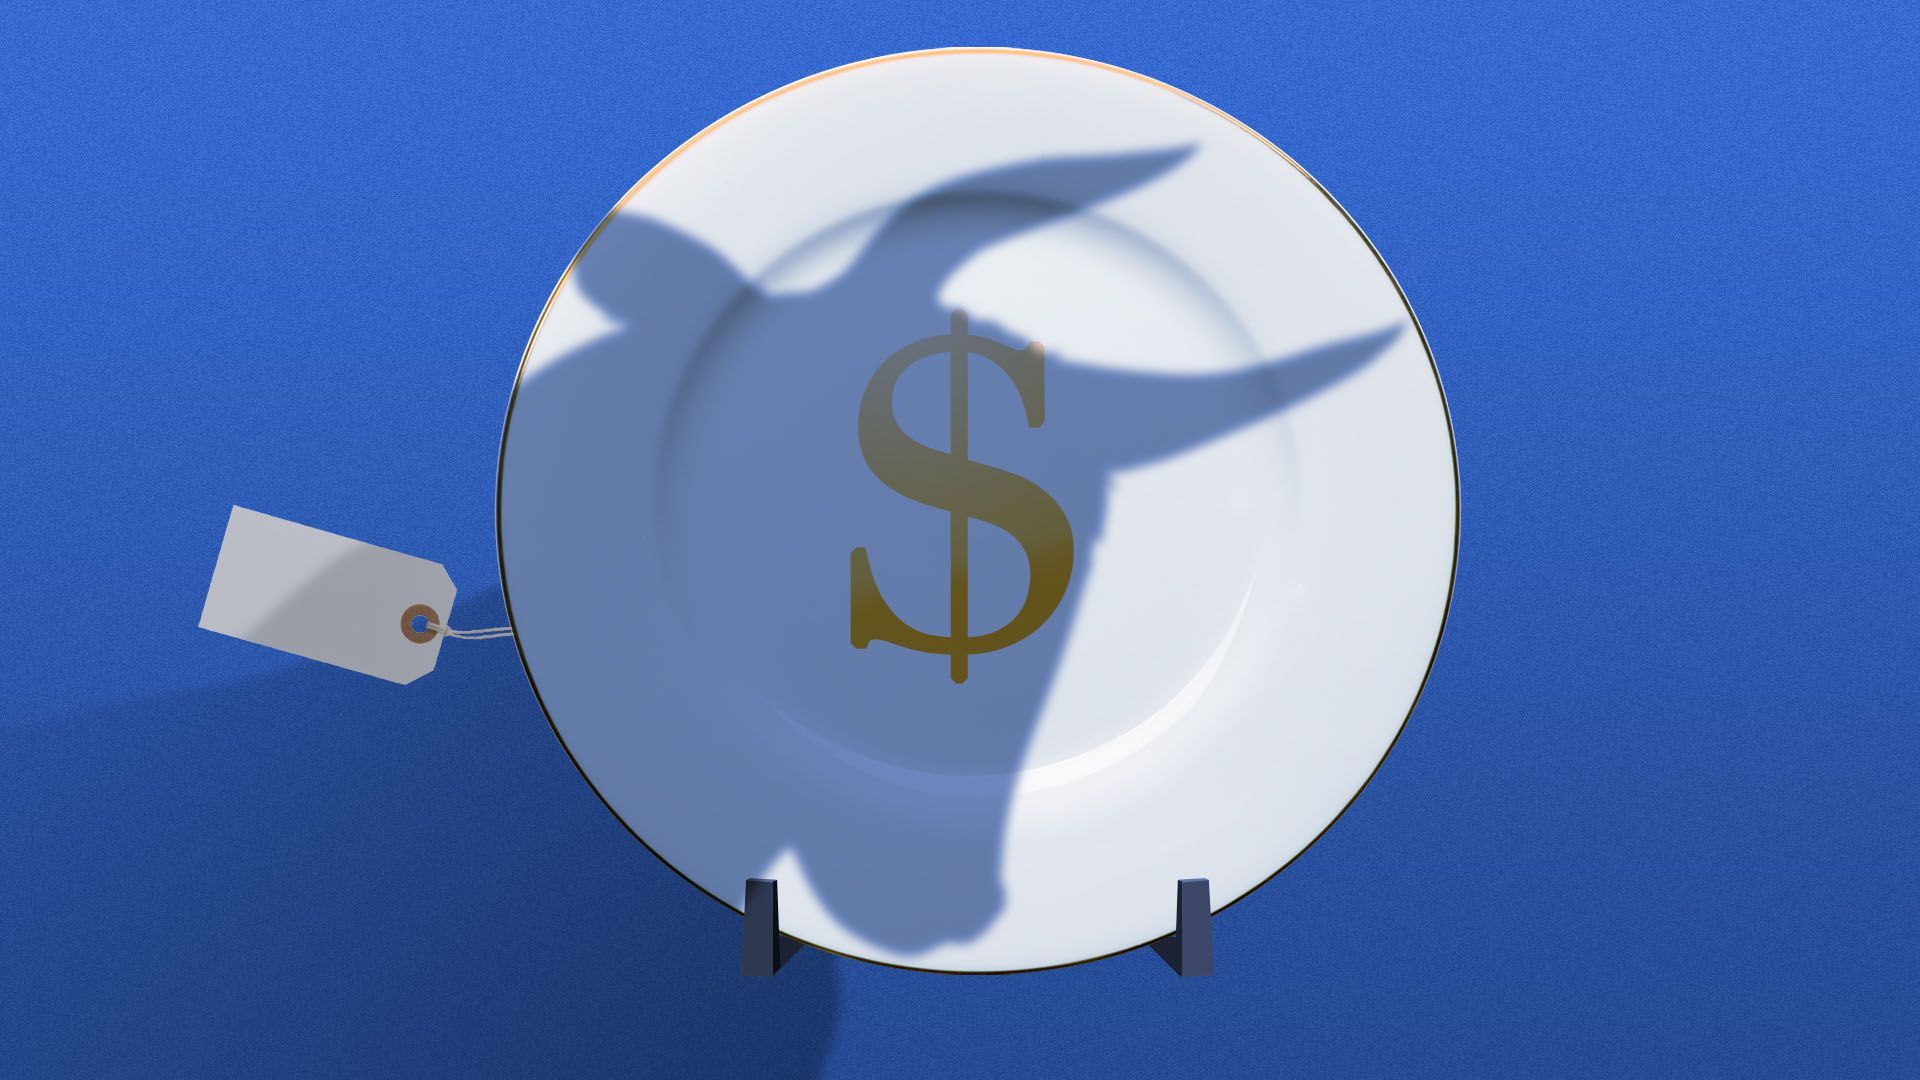 Illustration of a bull casting a shadow onto a plate in a china shop with a dollar sign in it 